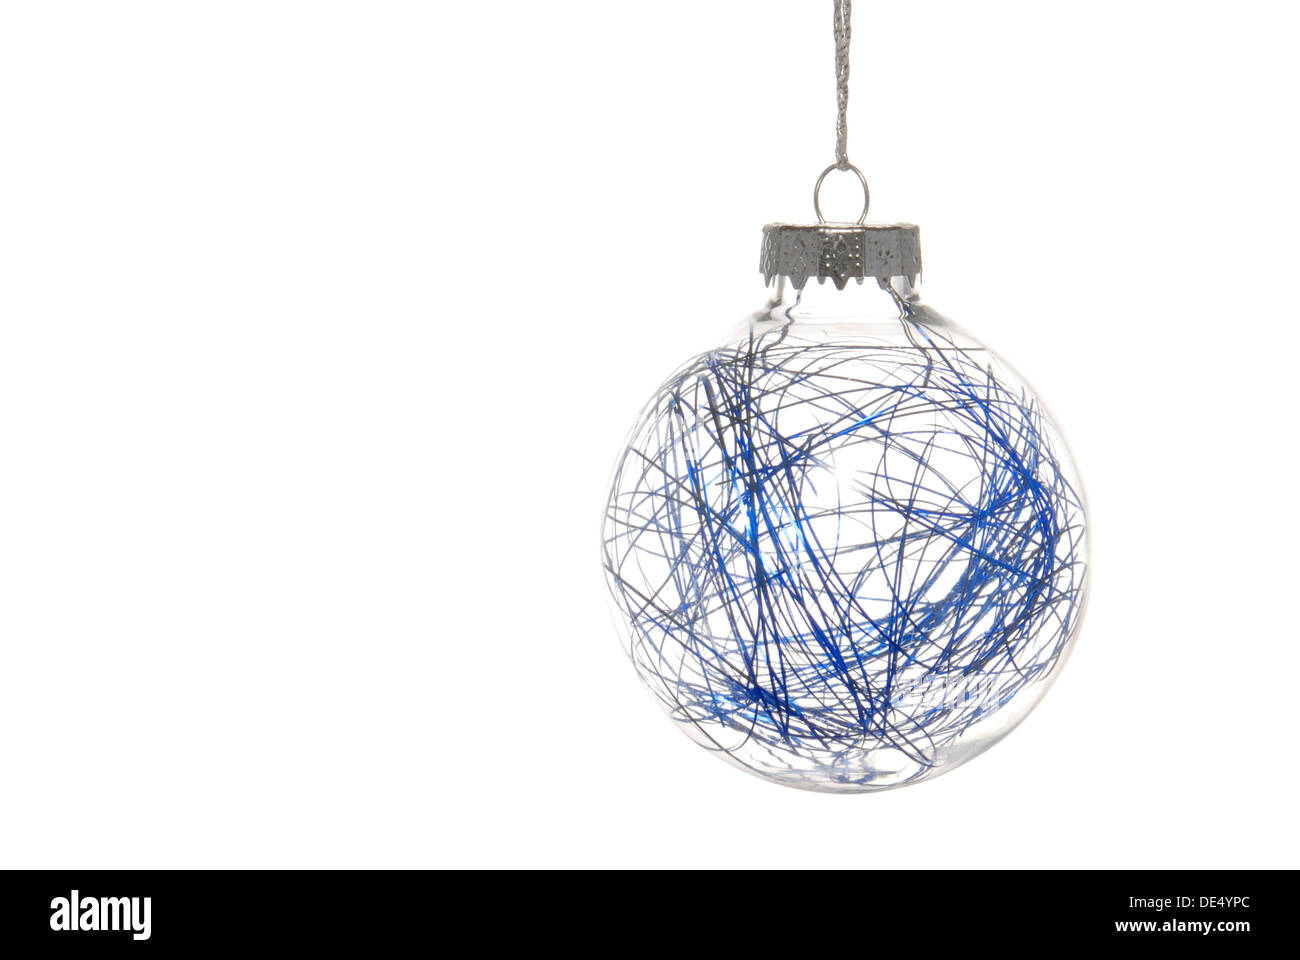 Transparent Christmas bauble with blue threads Stock Photo